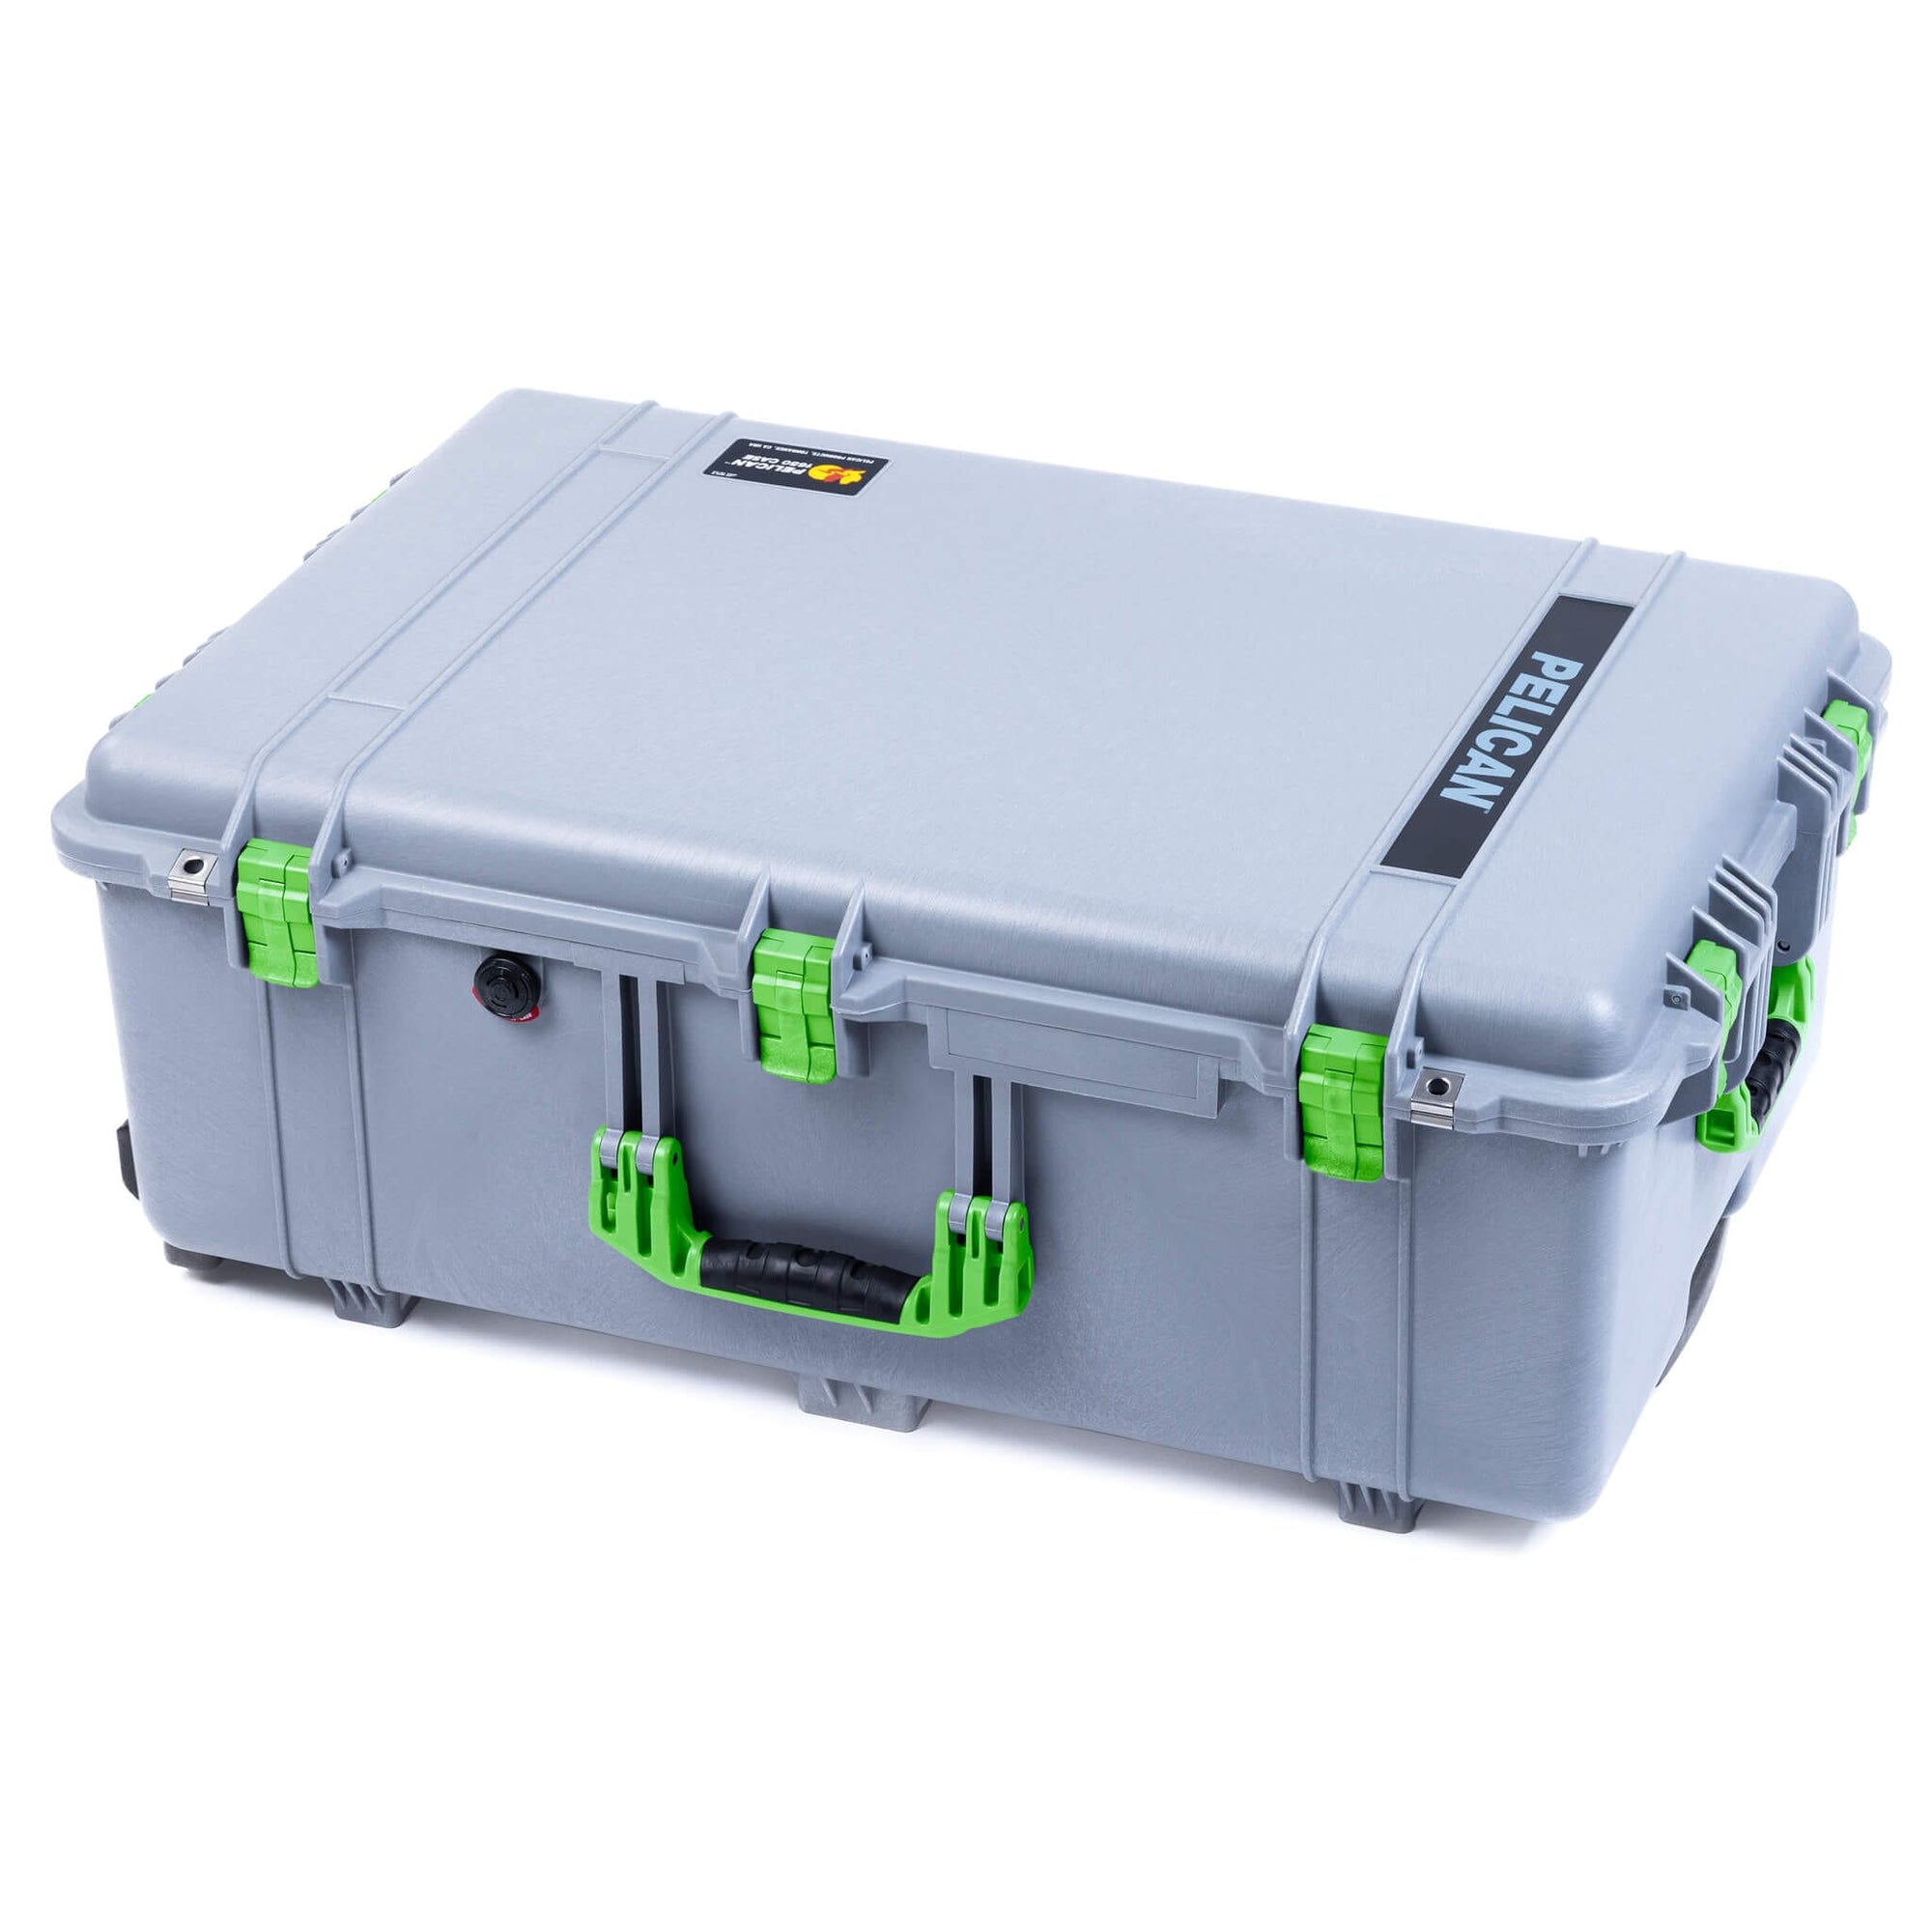 Pelican 1650 Case, Silver with Lime Green Handles & Latches ColorCase 